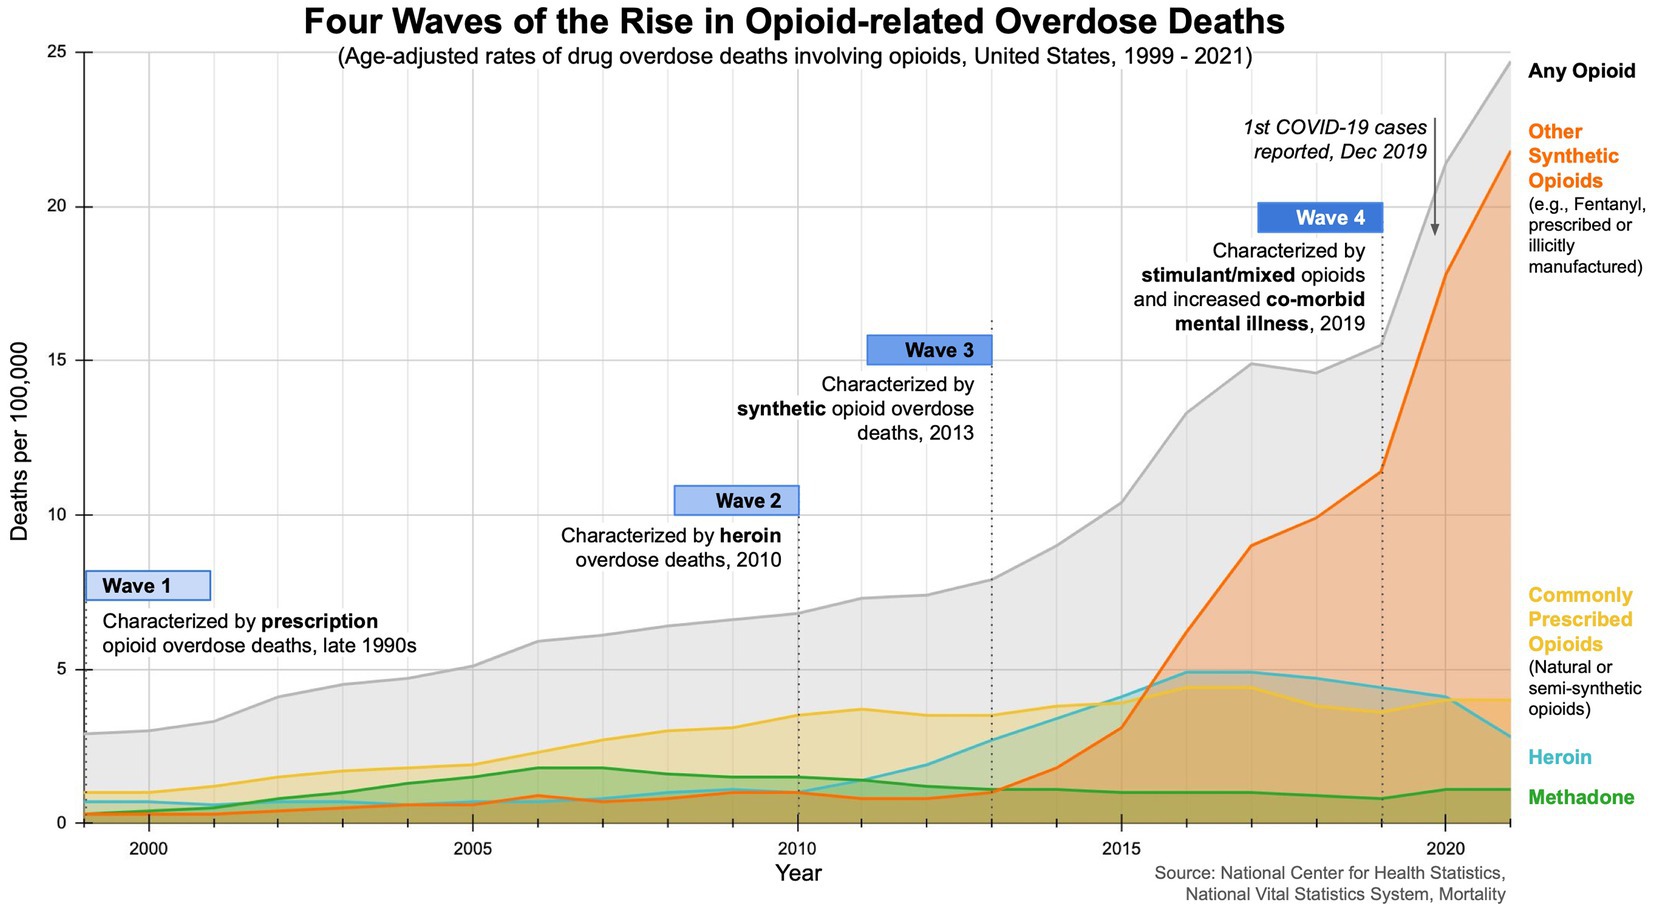 Shift in hospital opioid use during the COVID-19 pandemic in Brazil: a  time-series analysis of one million prescriptions